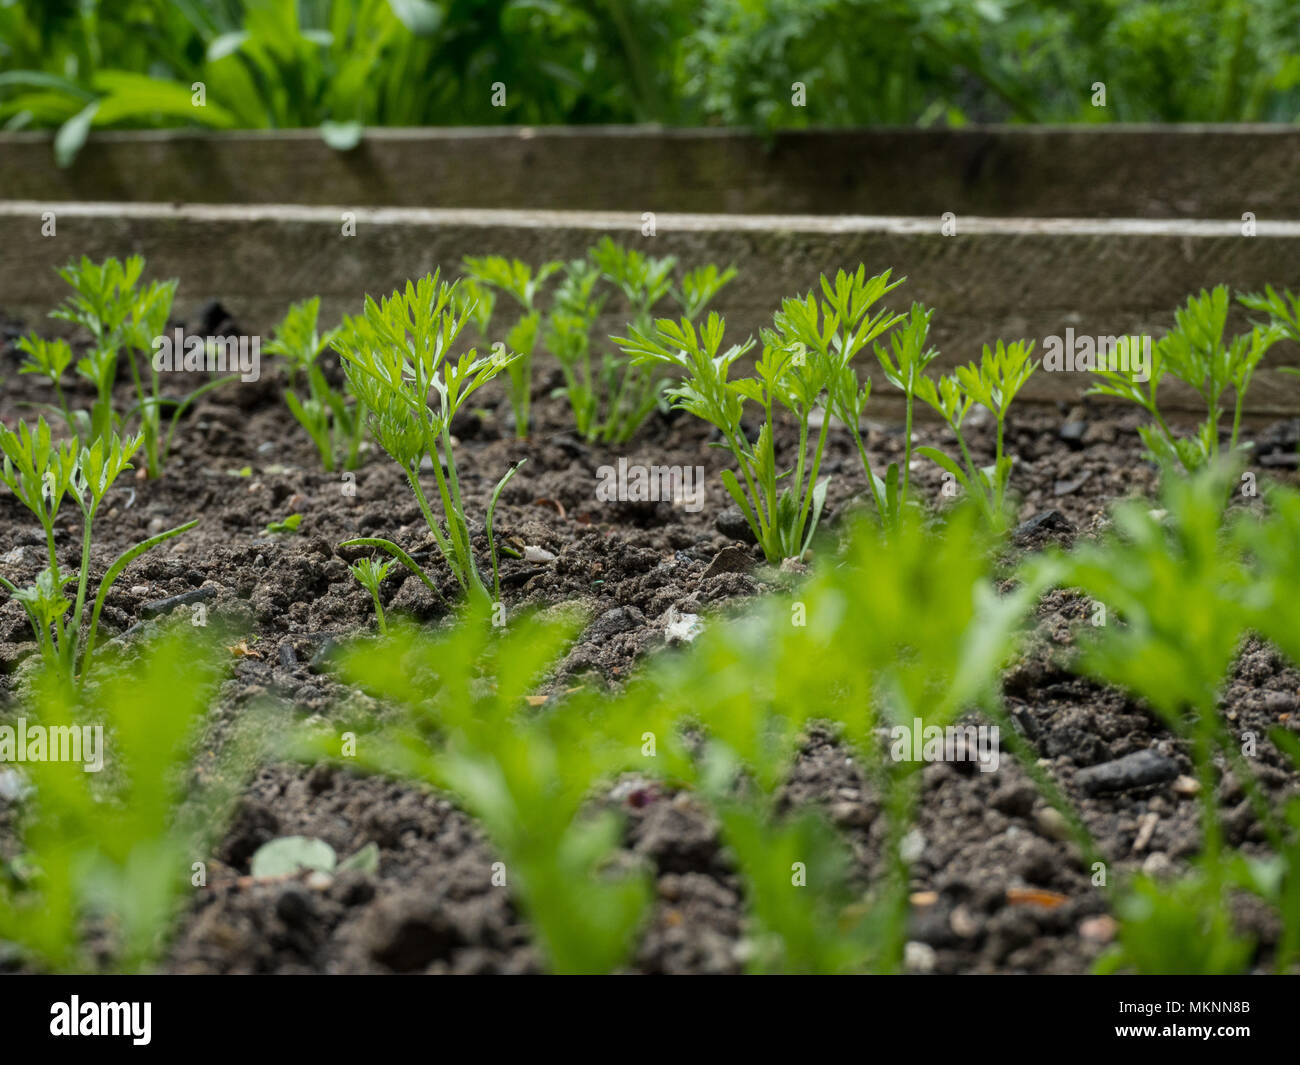 Low level close up of a row of carrot seedlings with out of focus seedling as a foreground Stock Photo